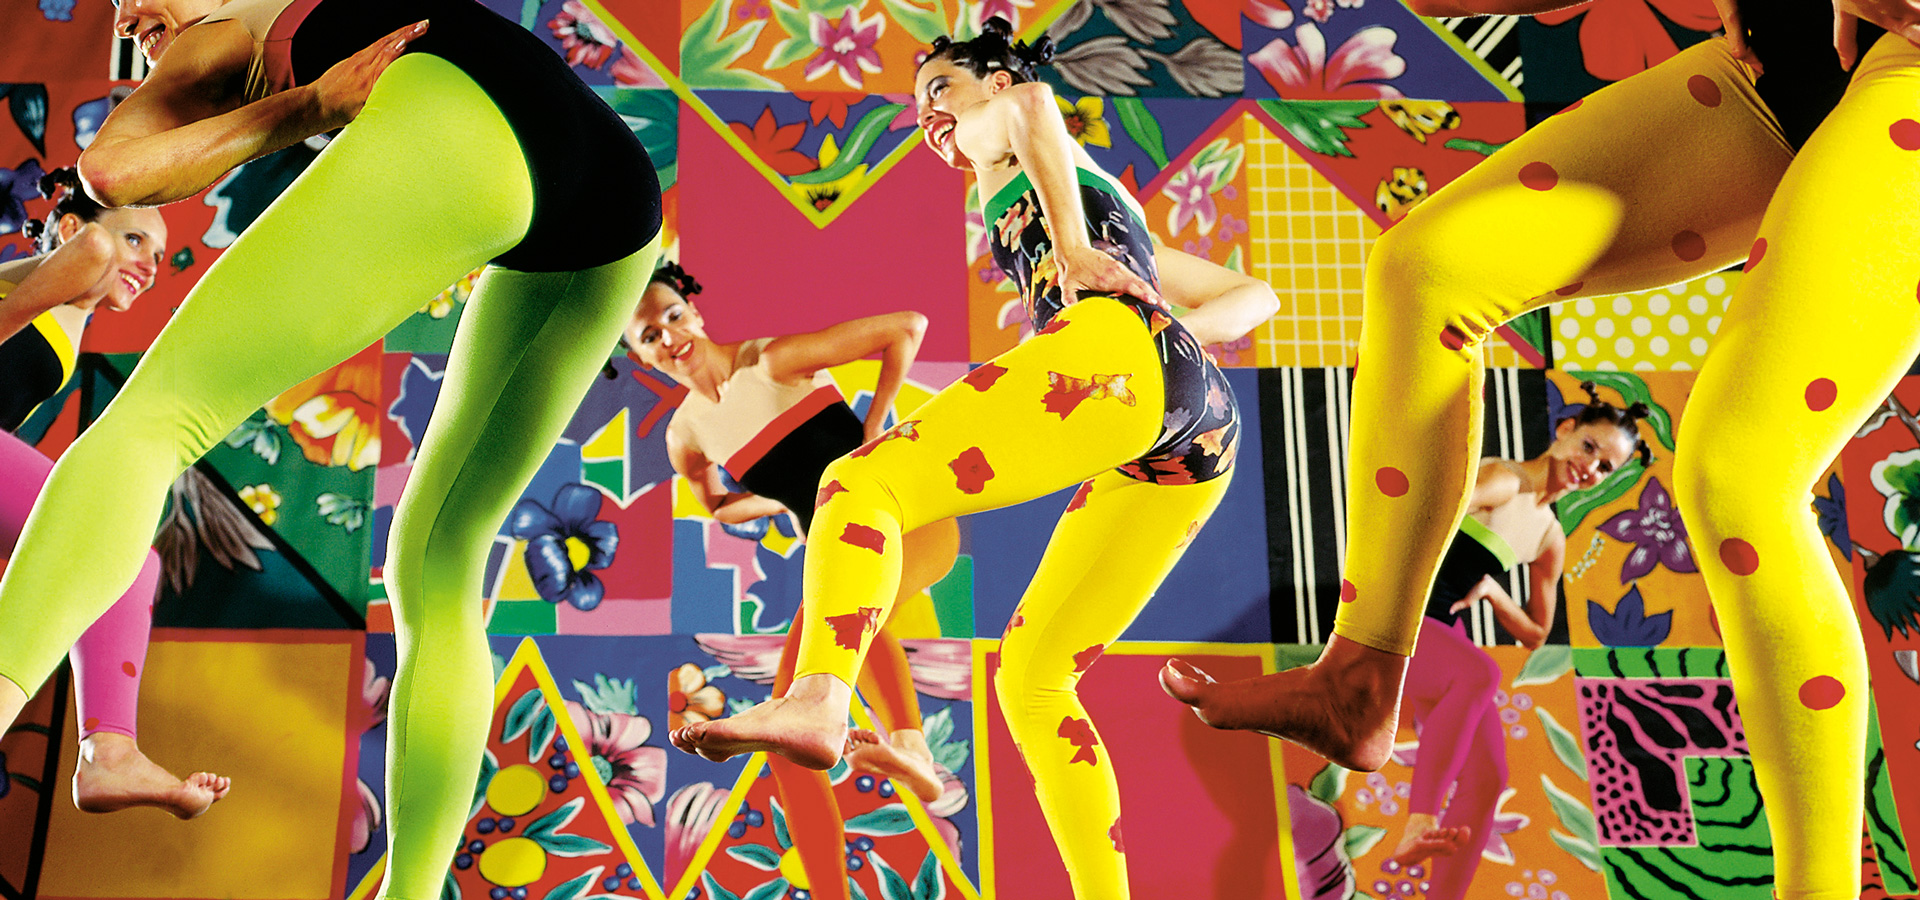 Dancers in the Grupo Corpo group wearing yellow leggings with black leotards, dancing against a vibrant, multi-patterned backdrop.